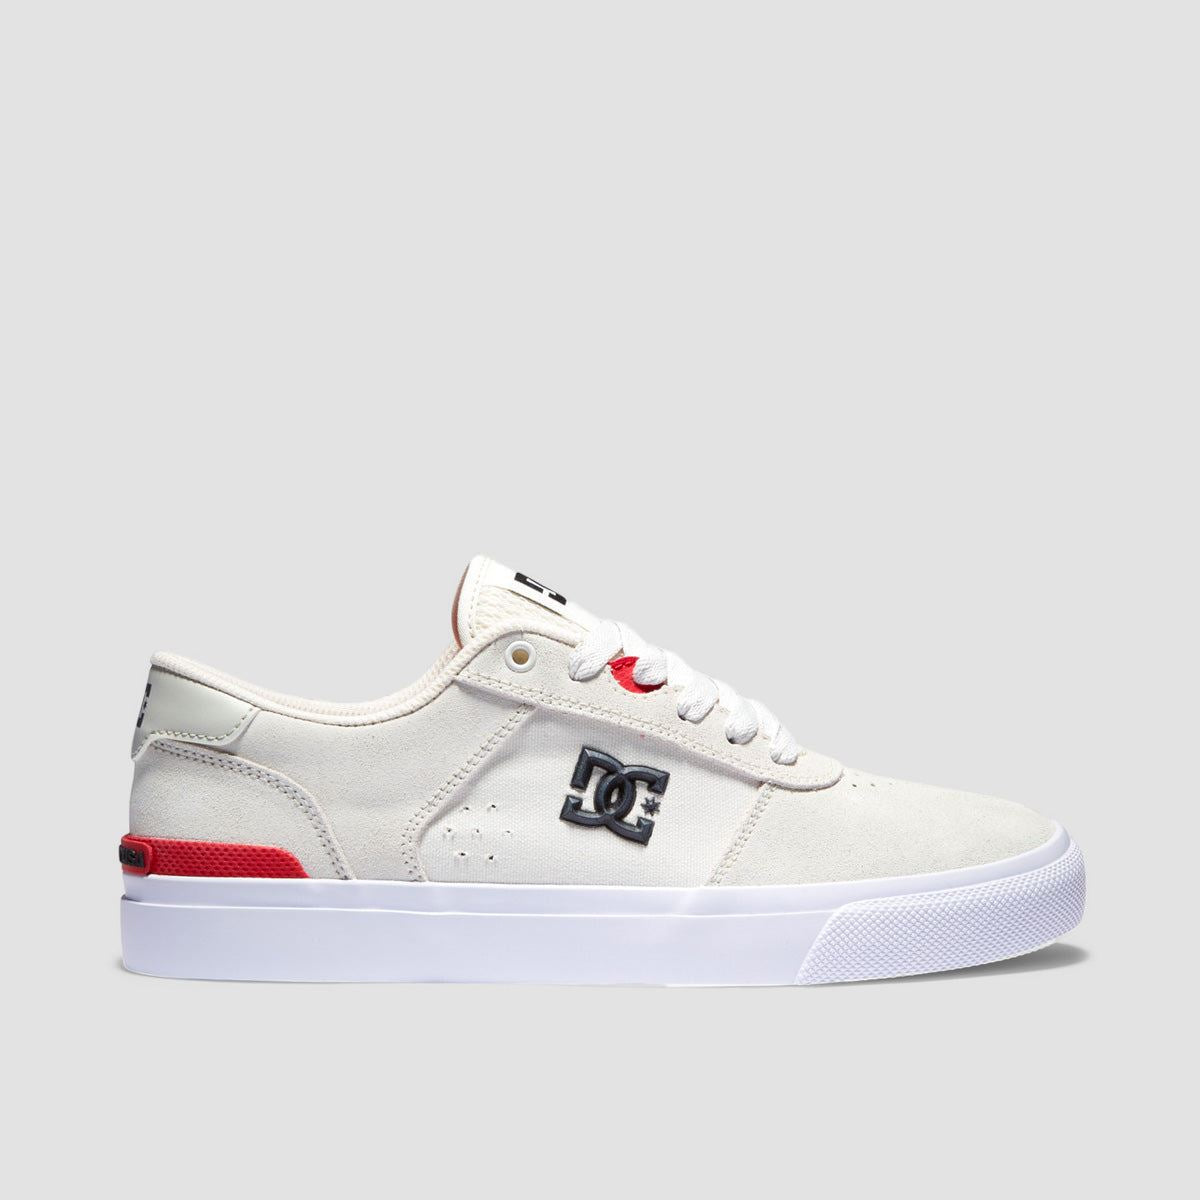 DC Teknic S Shoes - Off White